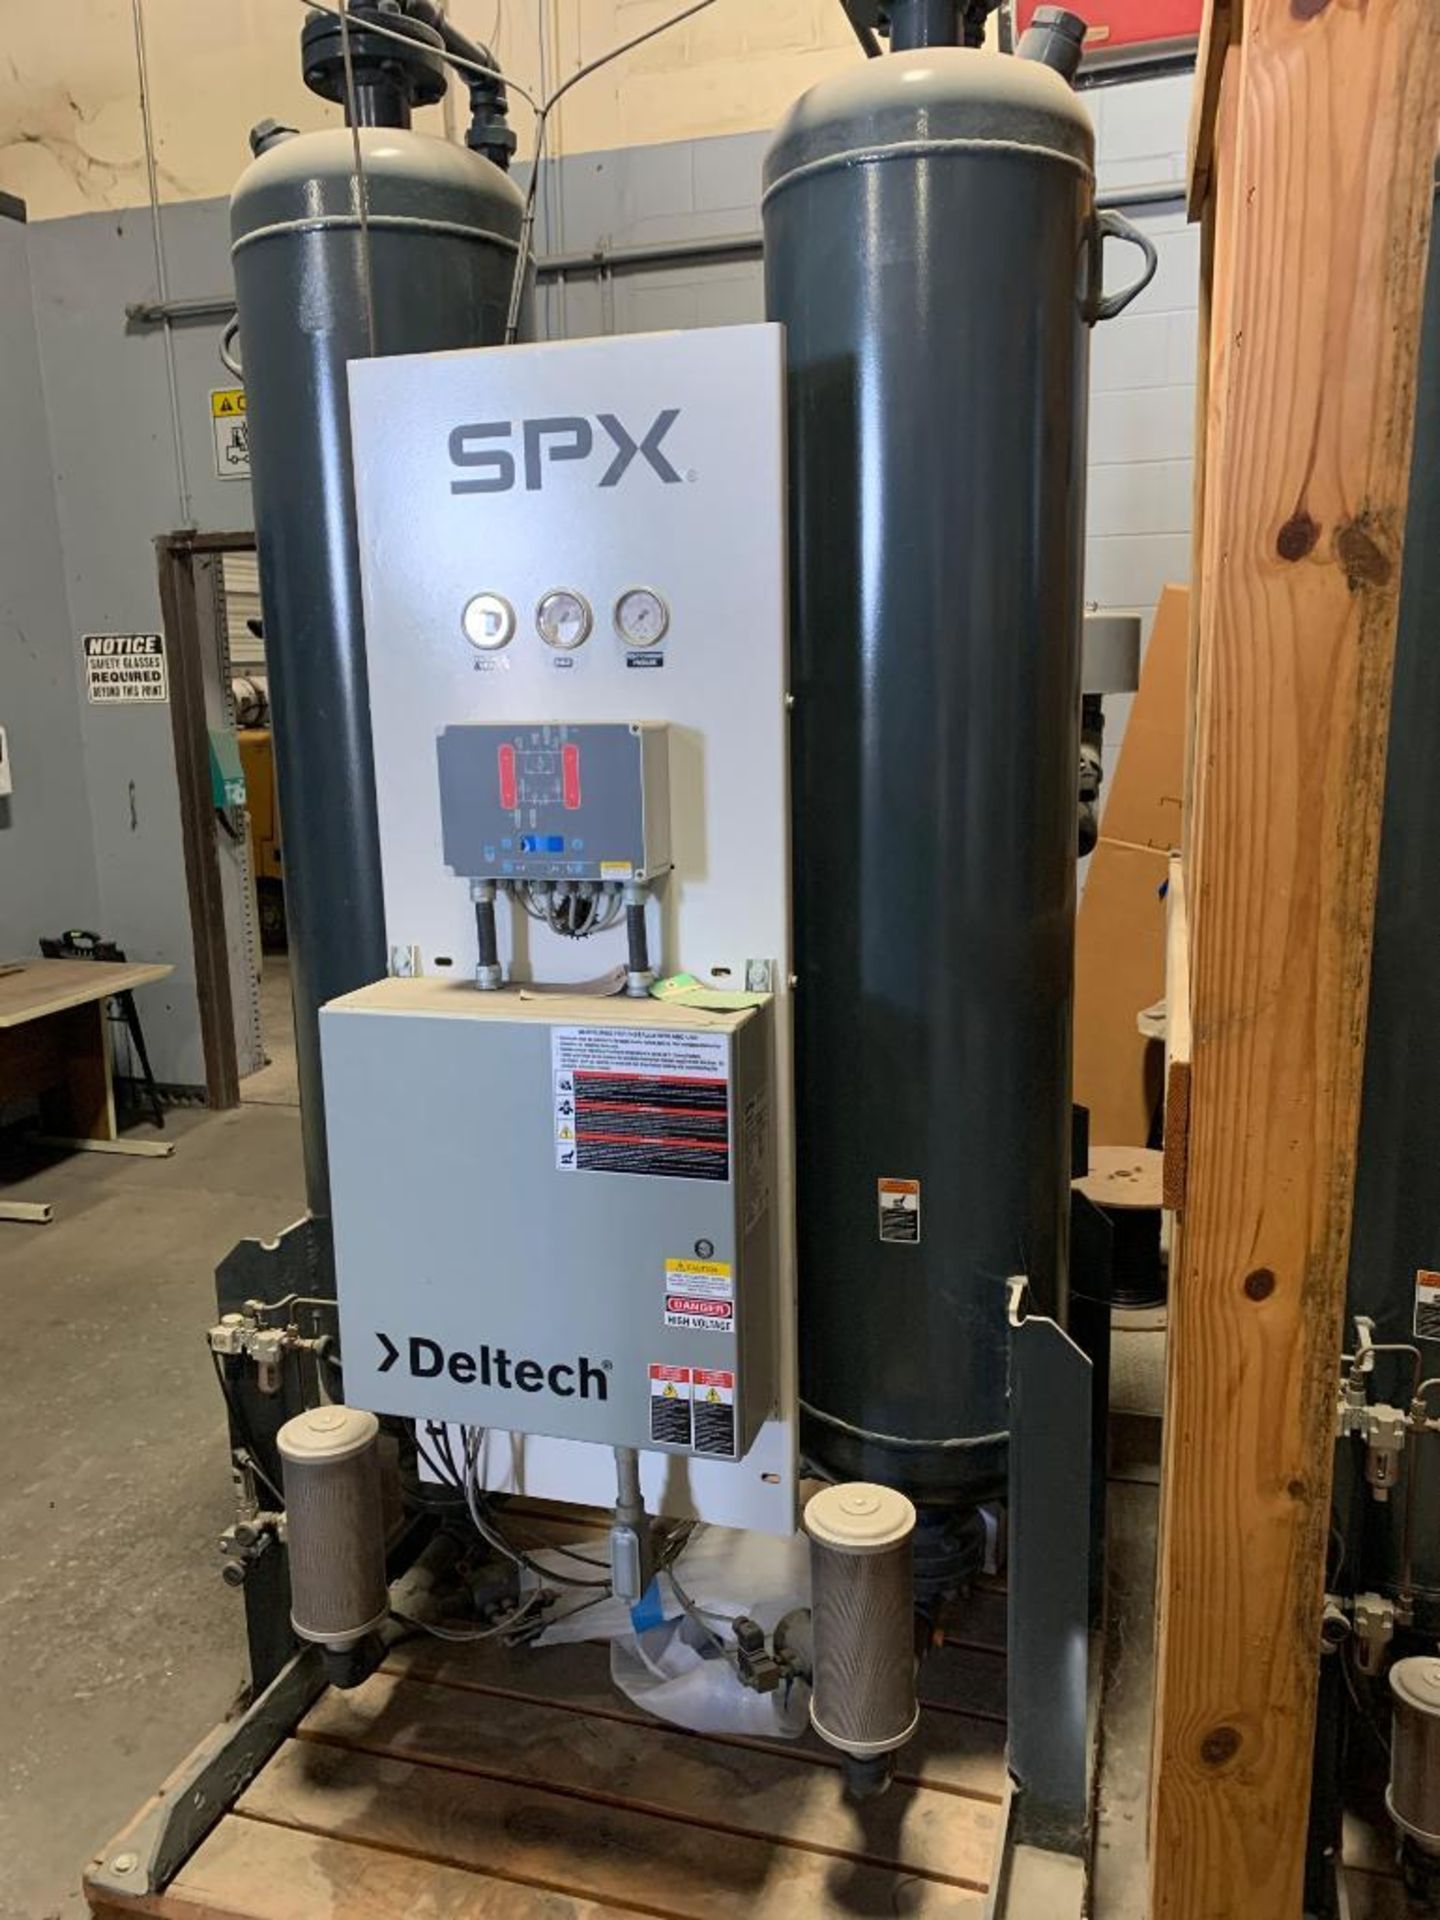 Deltech RP400 Externally Heated Desiccant Air Dryer 2014 - Image 2 of 7